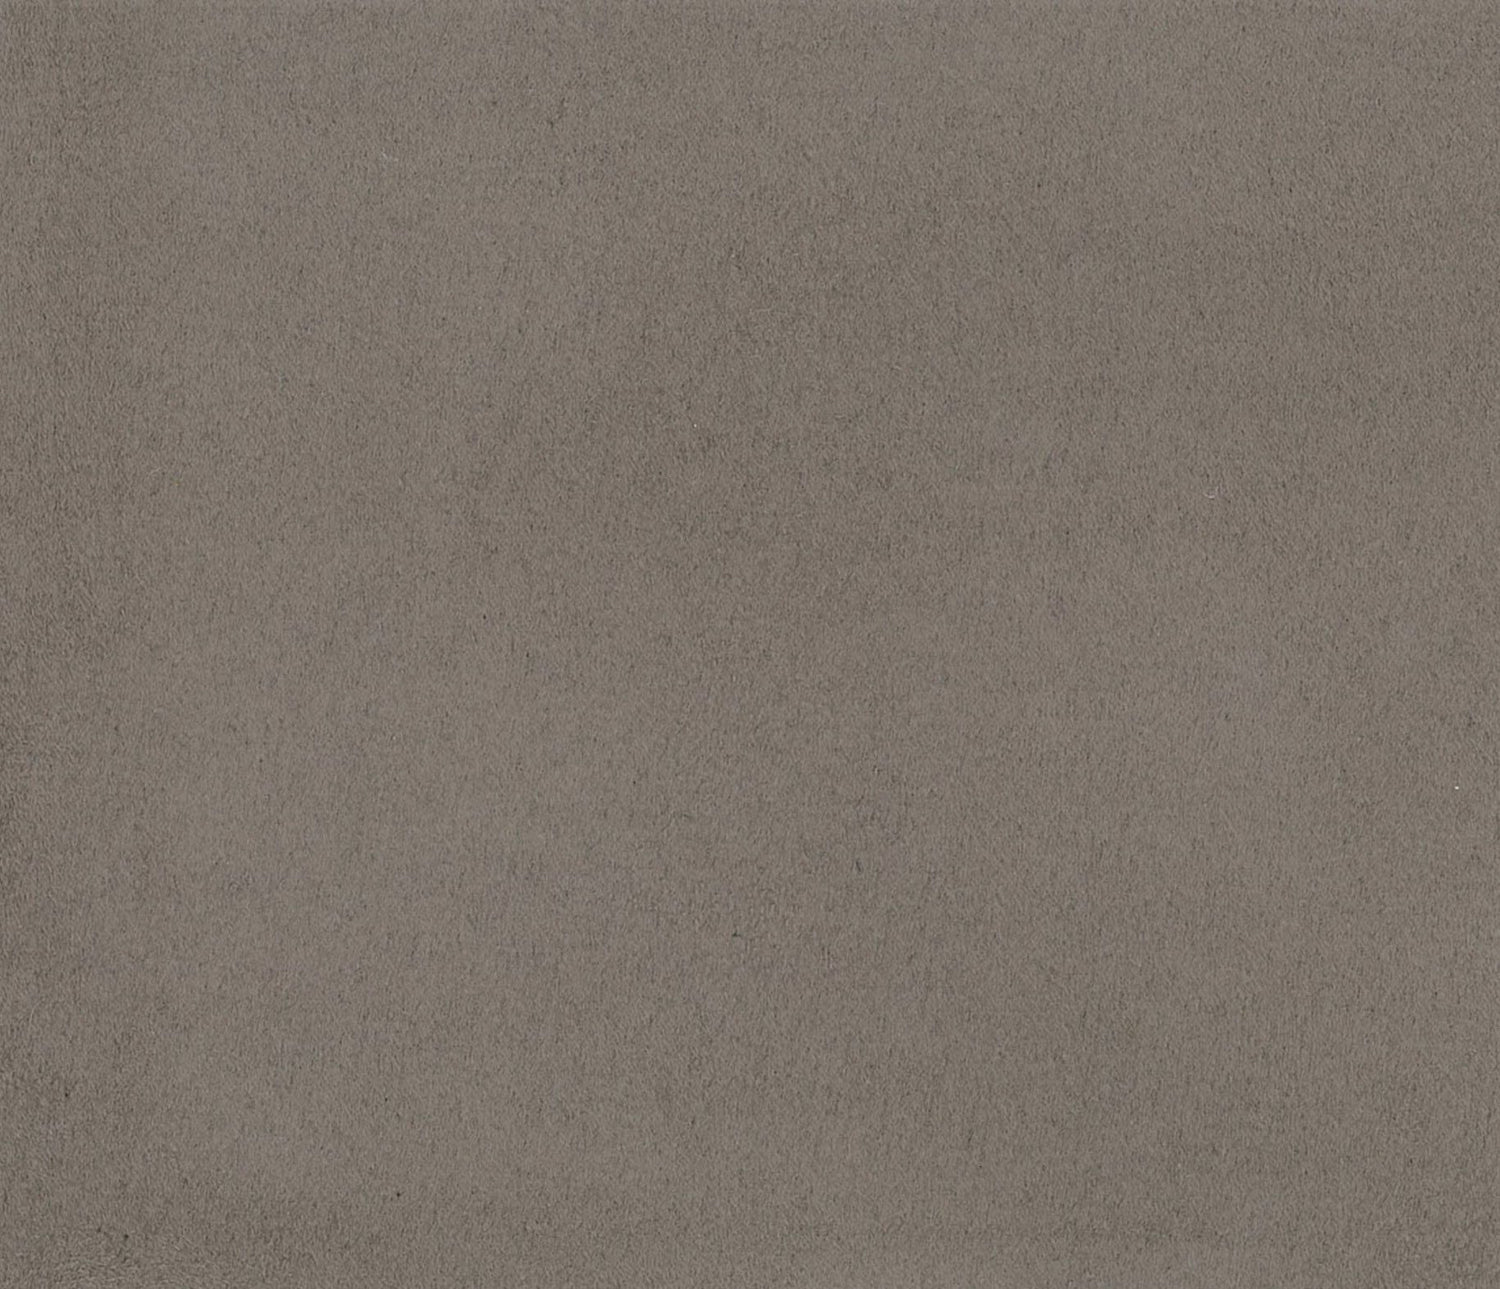 Sarabelle Suede fabric in taupe color - pattern number H6 0003SARA - by Scalamandre in the Old World Weavers collection